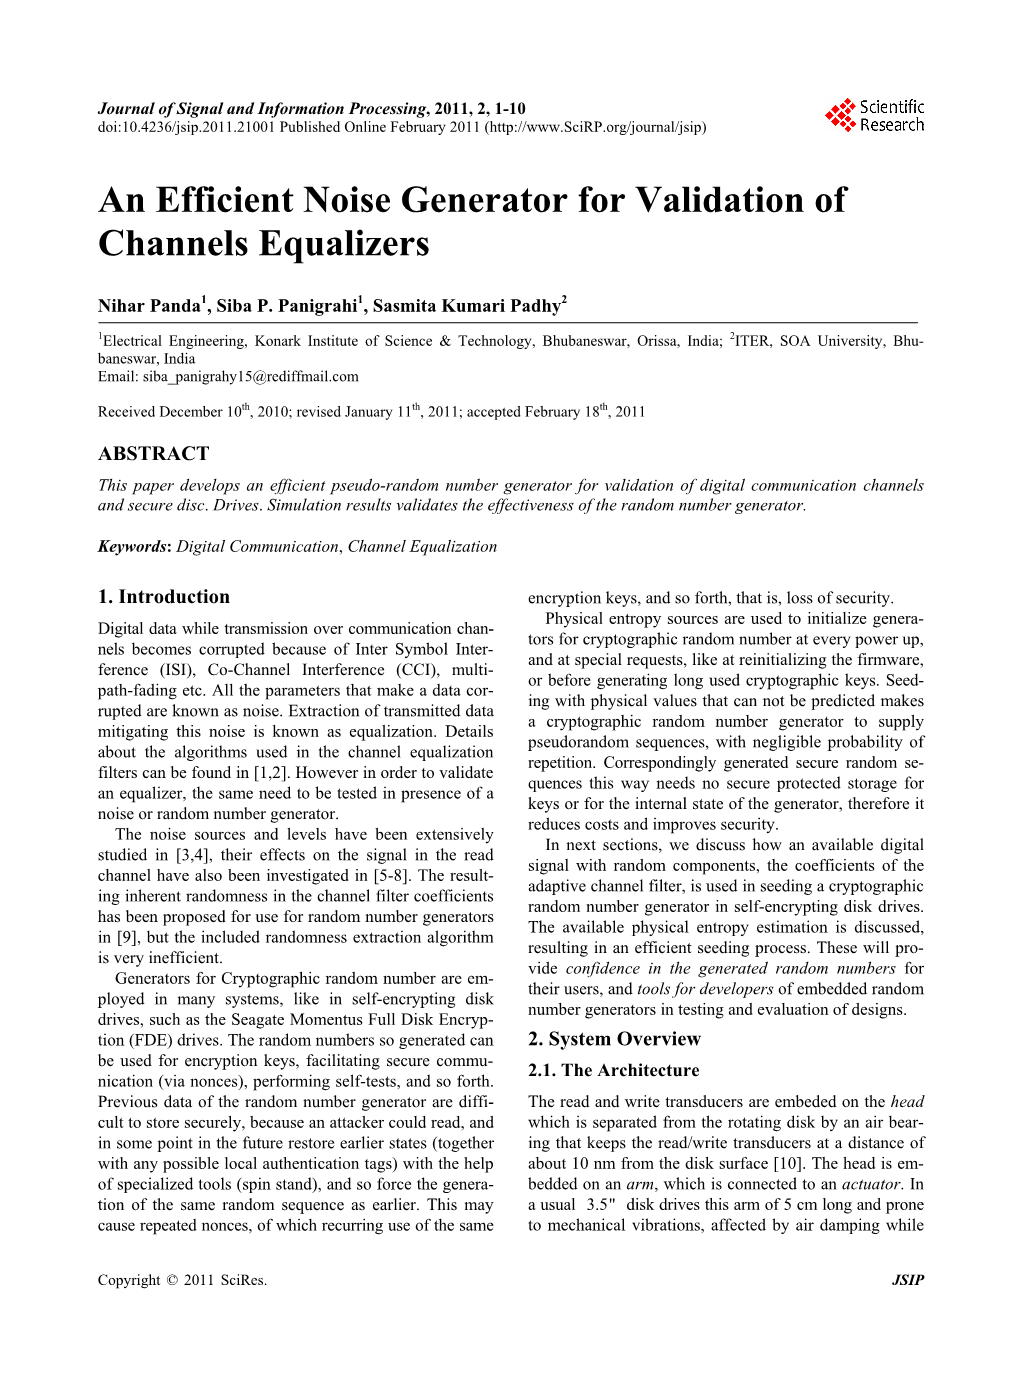 An Efficient Noise Generator for Validation of Channels Equalizers